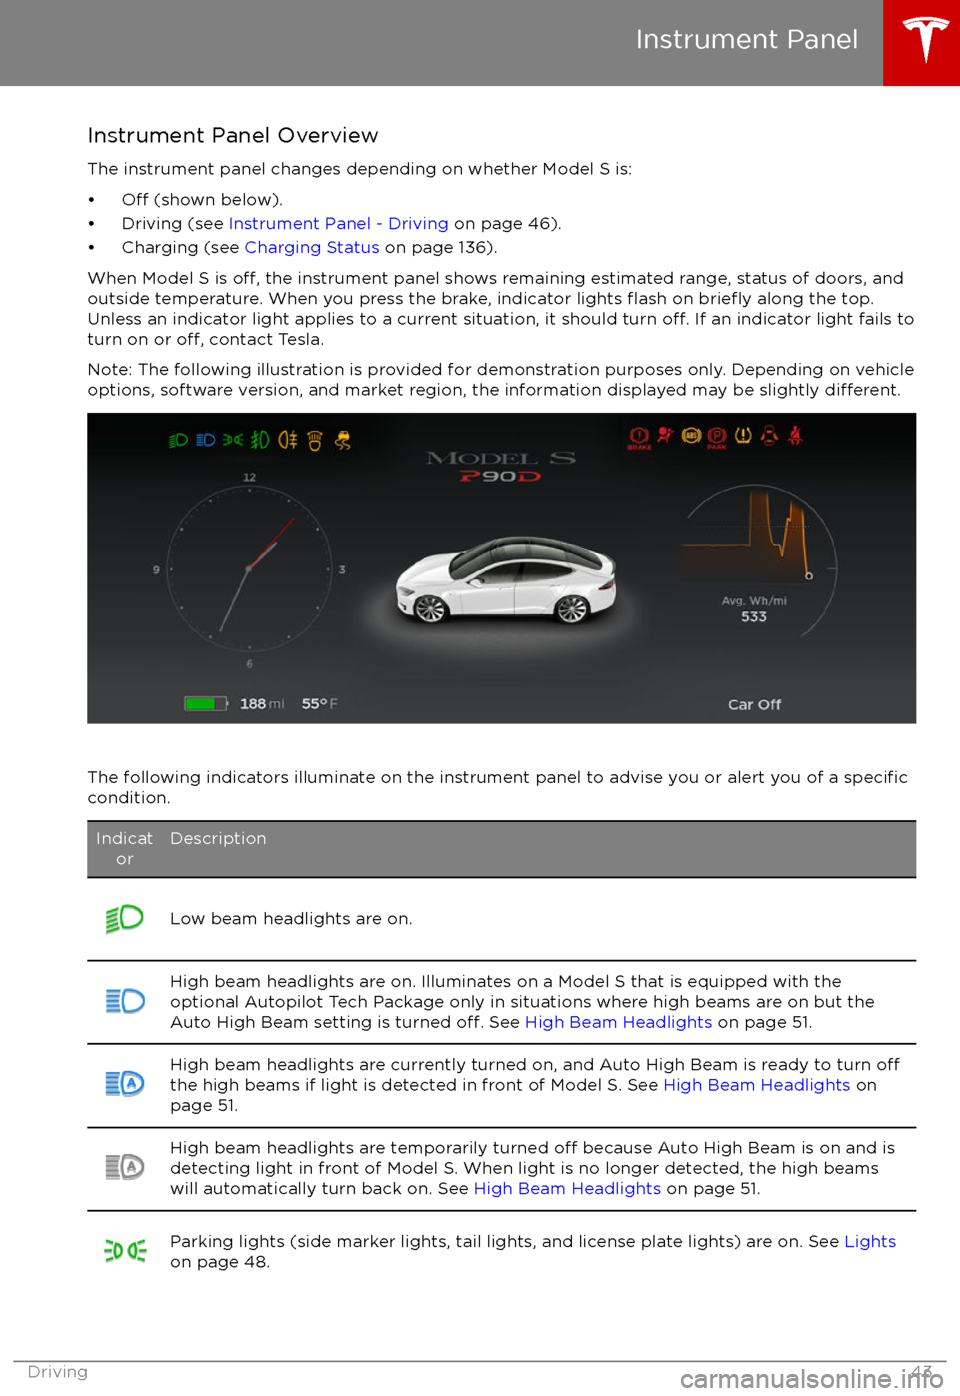 TESLA MODEL S 2017 Service Manual Instrument Panel Overview
The instrument panel changes depending on whether Model S is:
